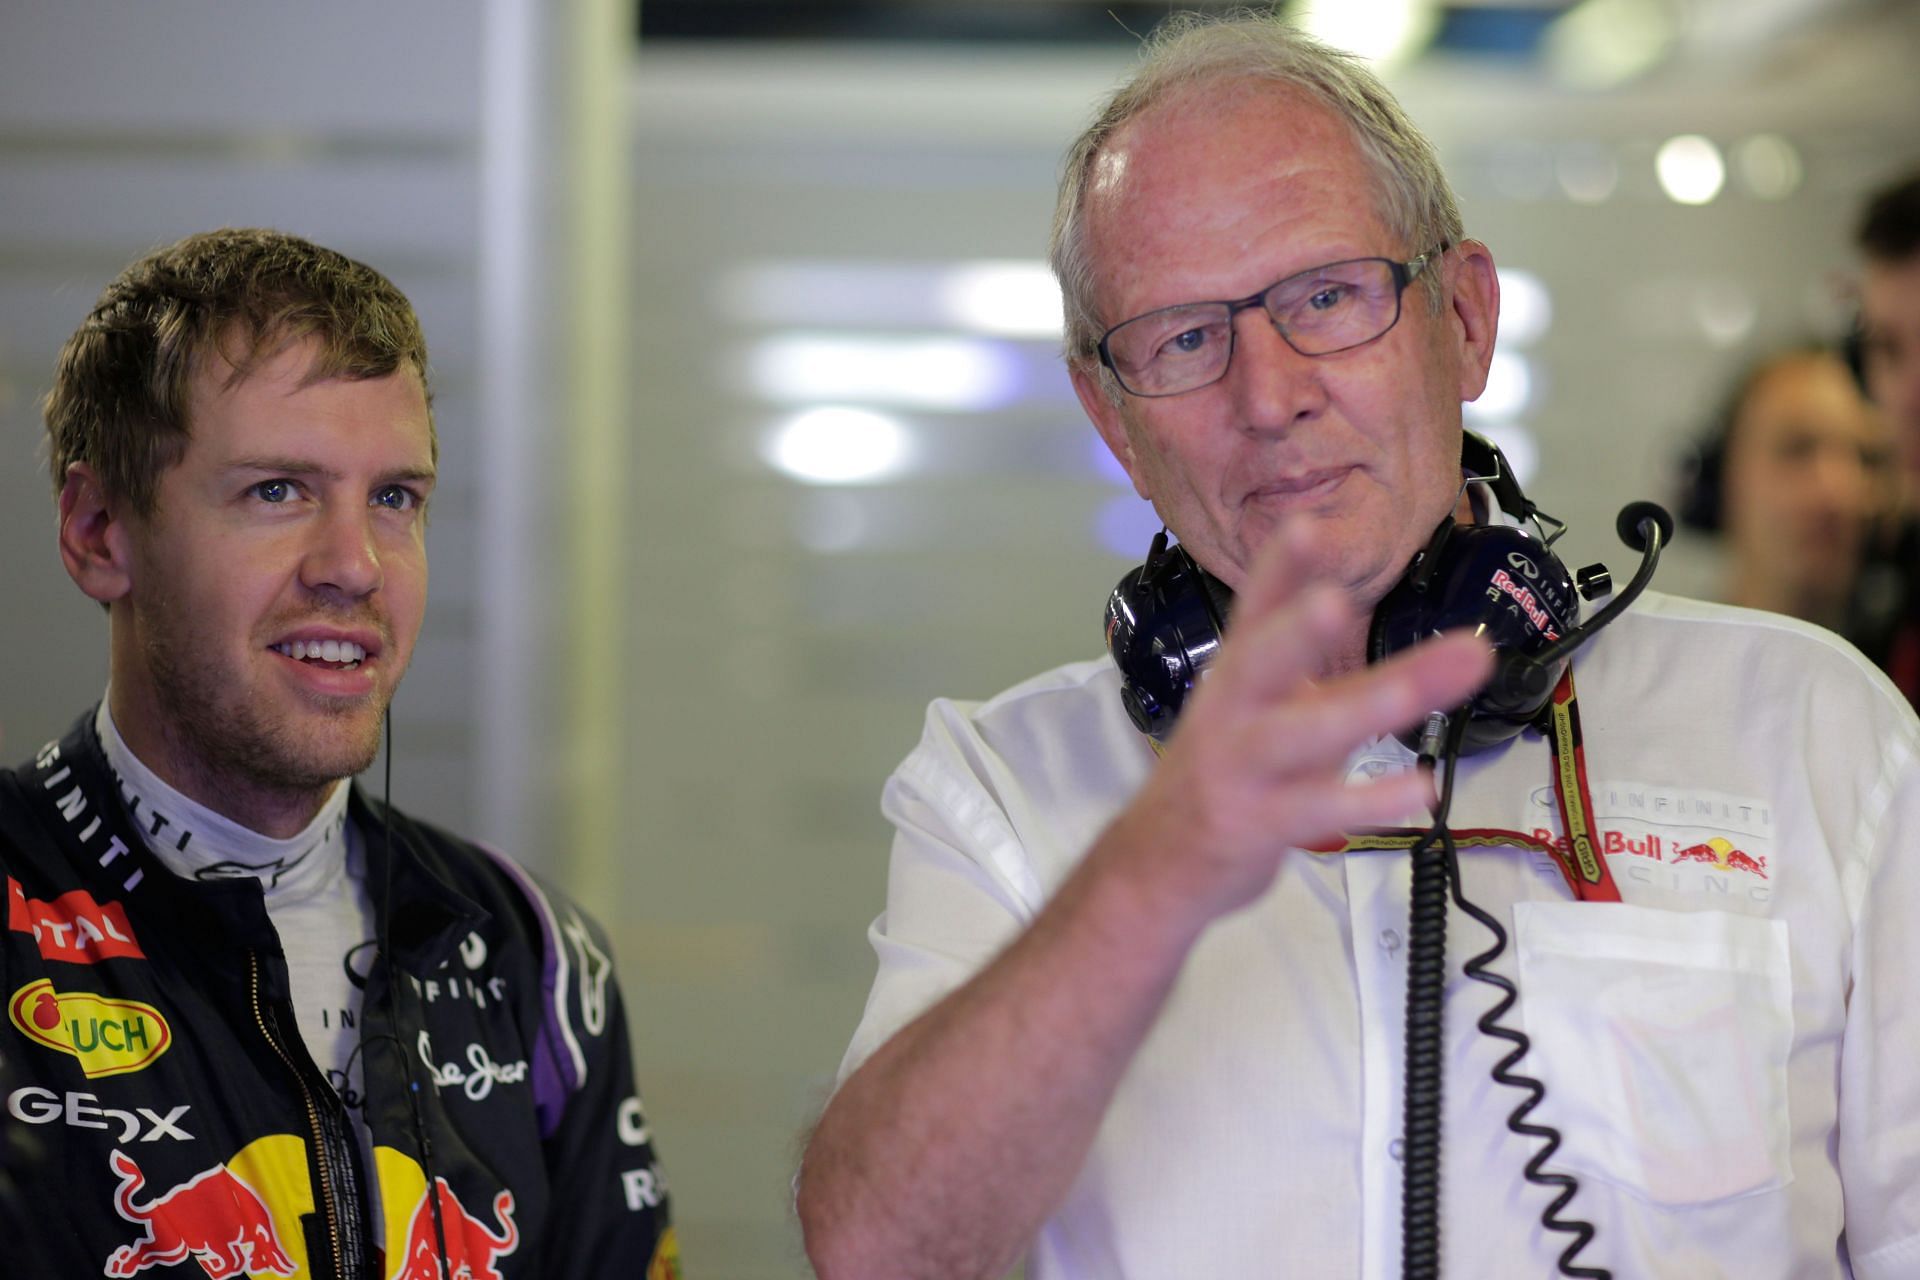 Sebastian Vettel and Dr Helmut Marko the Red Bull Motorsport Consultant in Monza at the 2014 Italian GP. (Photo by Adam Pretty/Getty Images)